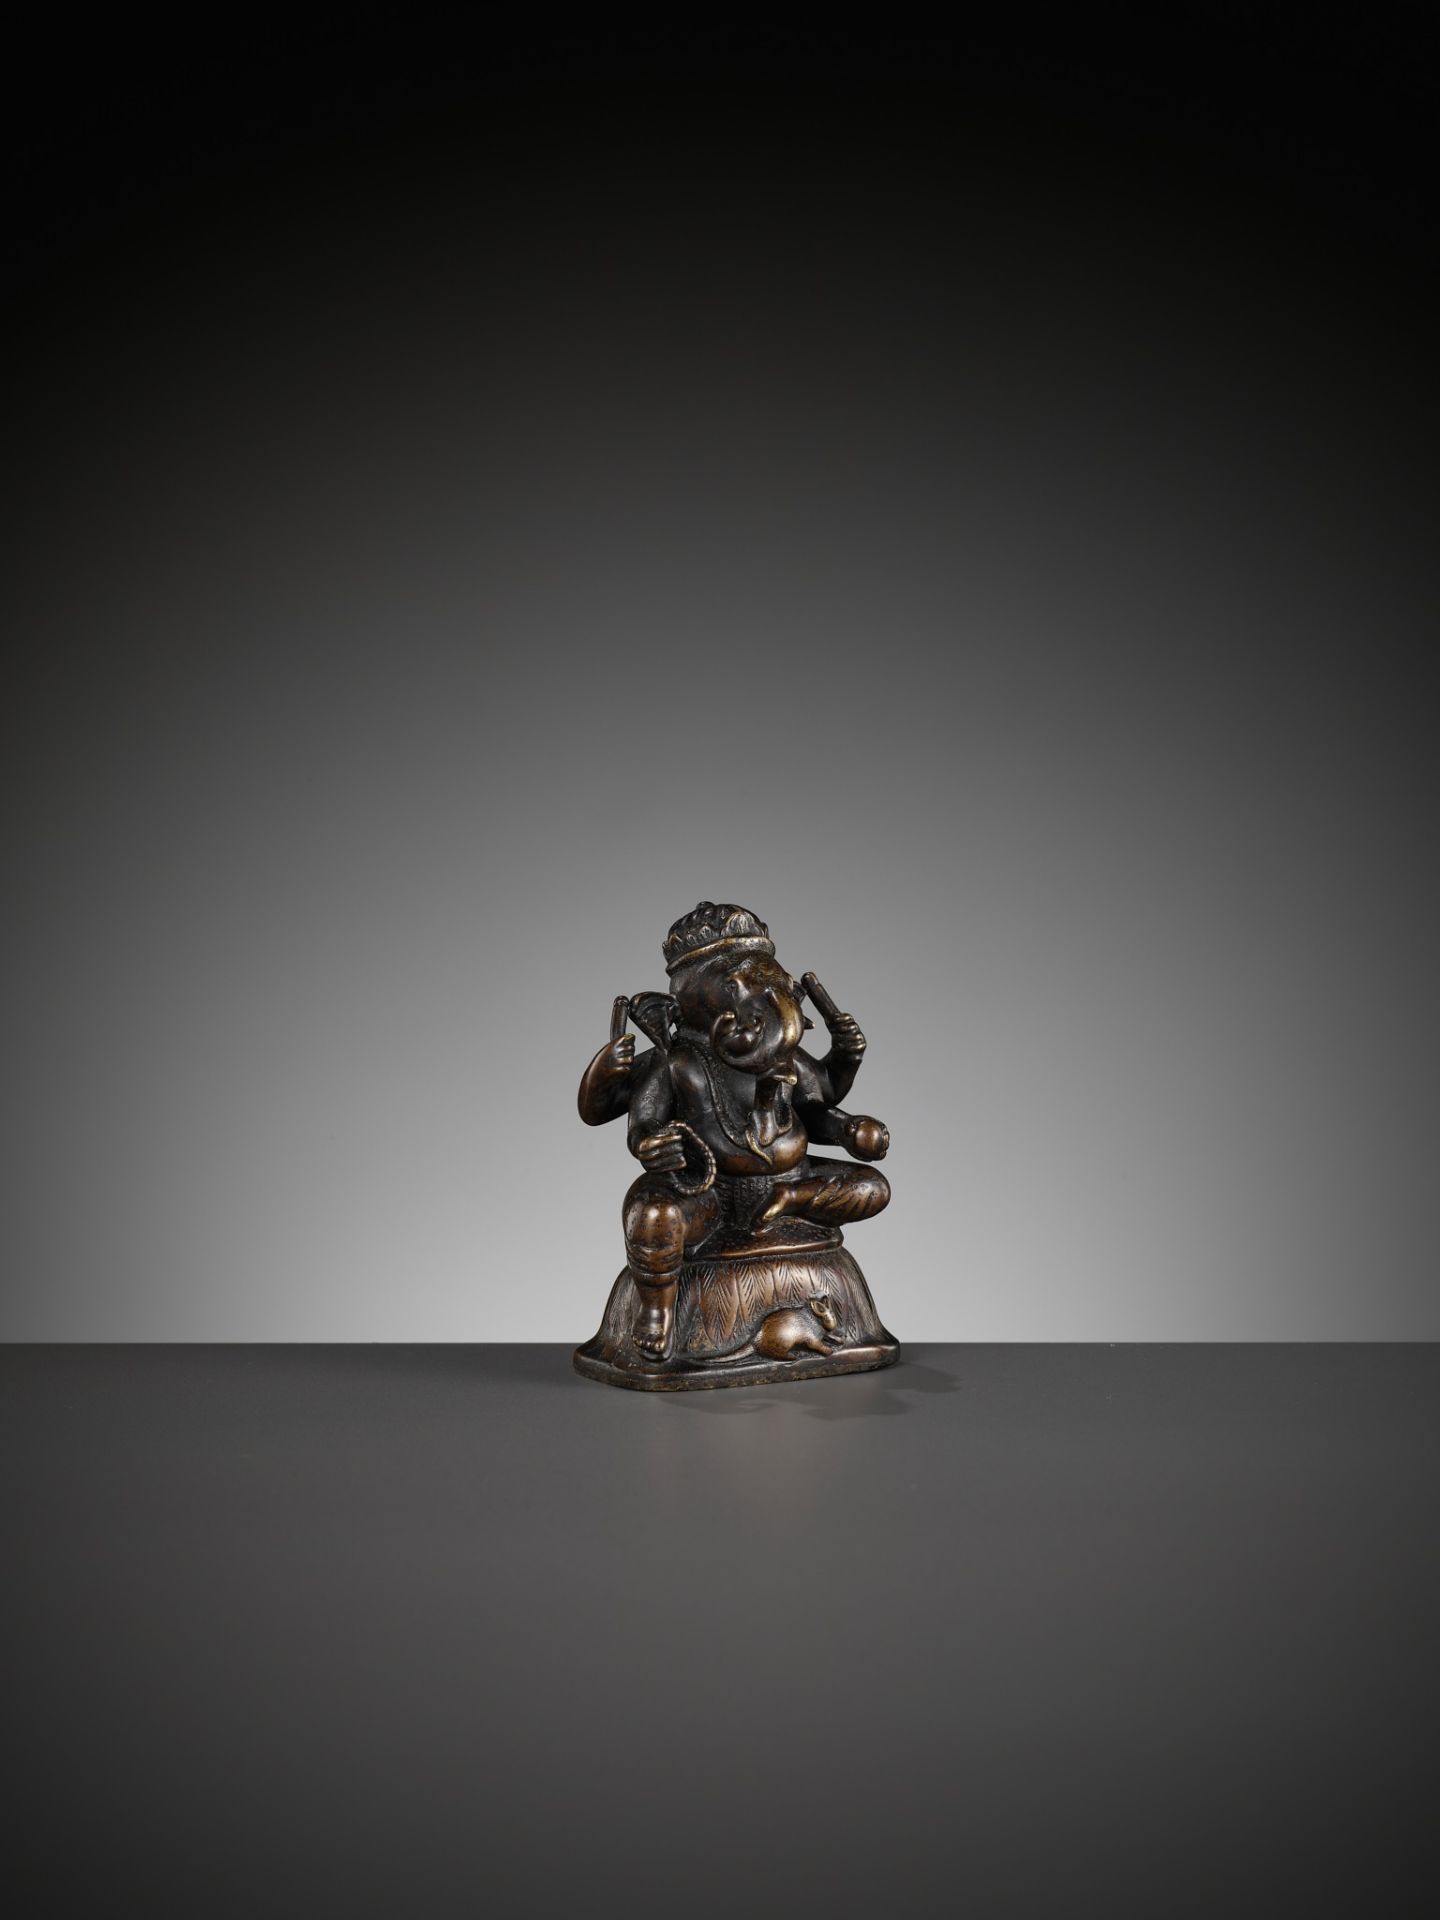 A SMALL BRONZE FIGURE OF GANESHA, SOUTH INDIA, 17TH - 18TH CENTURY - Image 12 of 14